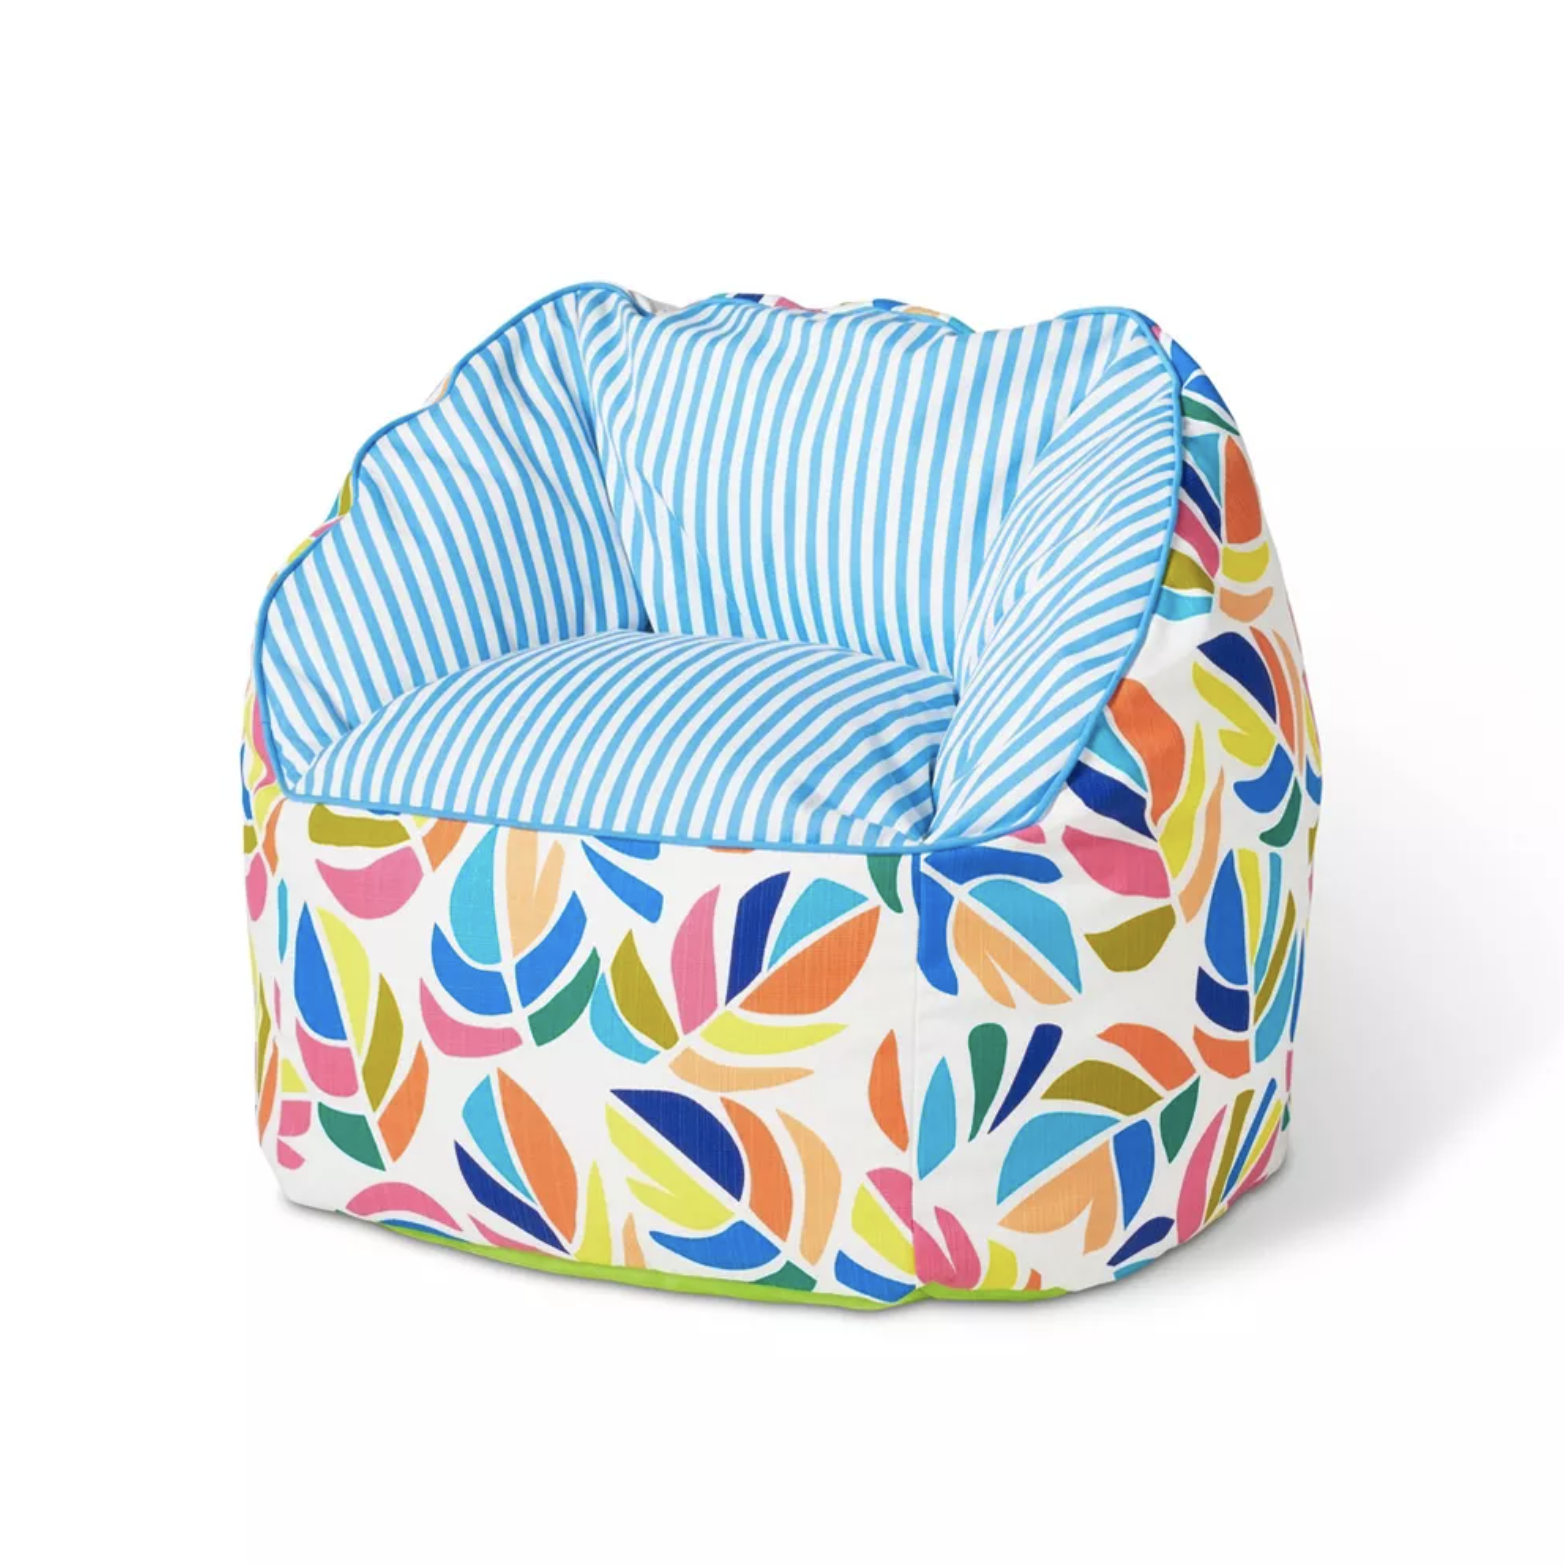 Colorful leaf and striped outdoor bean bag chair